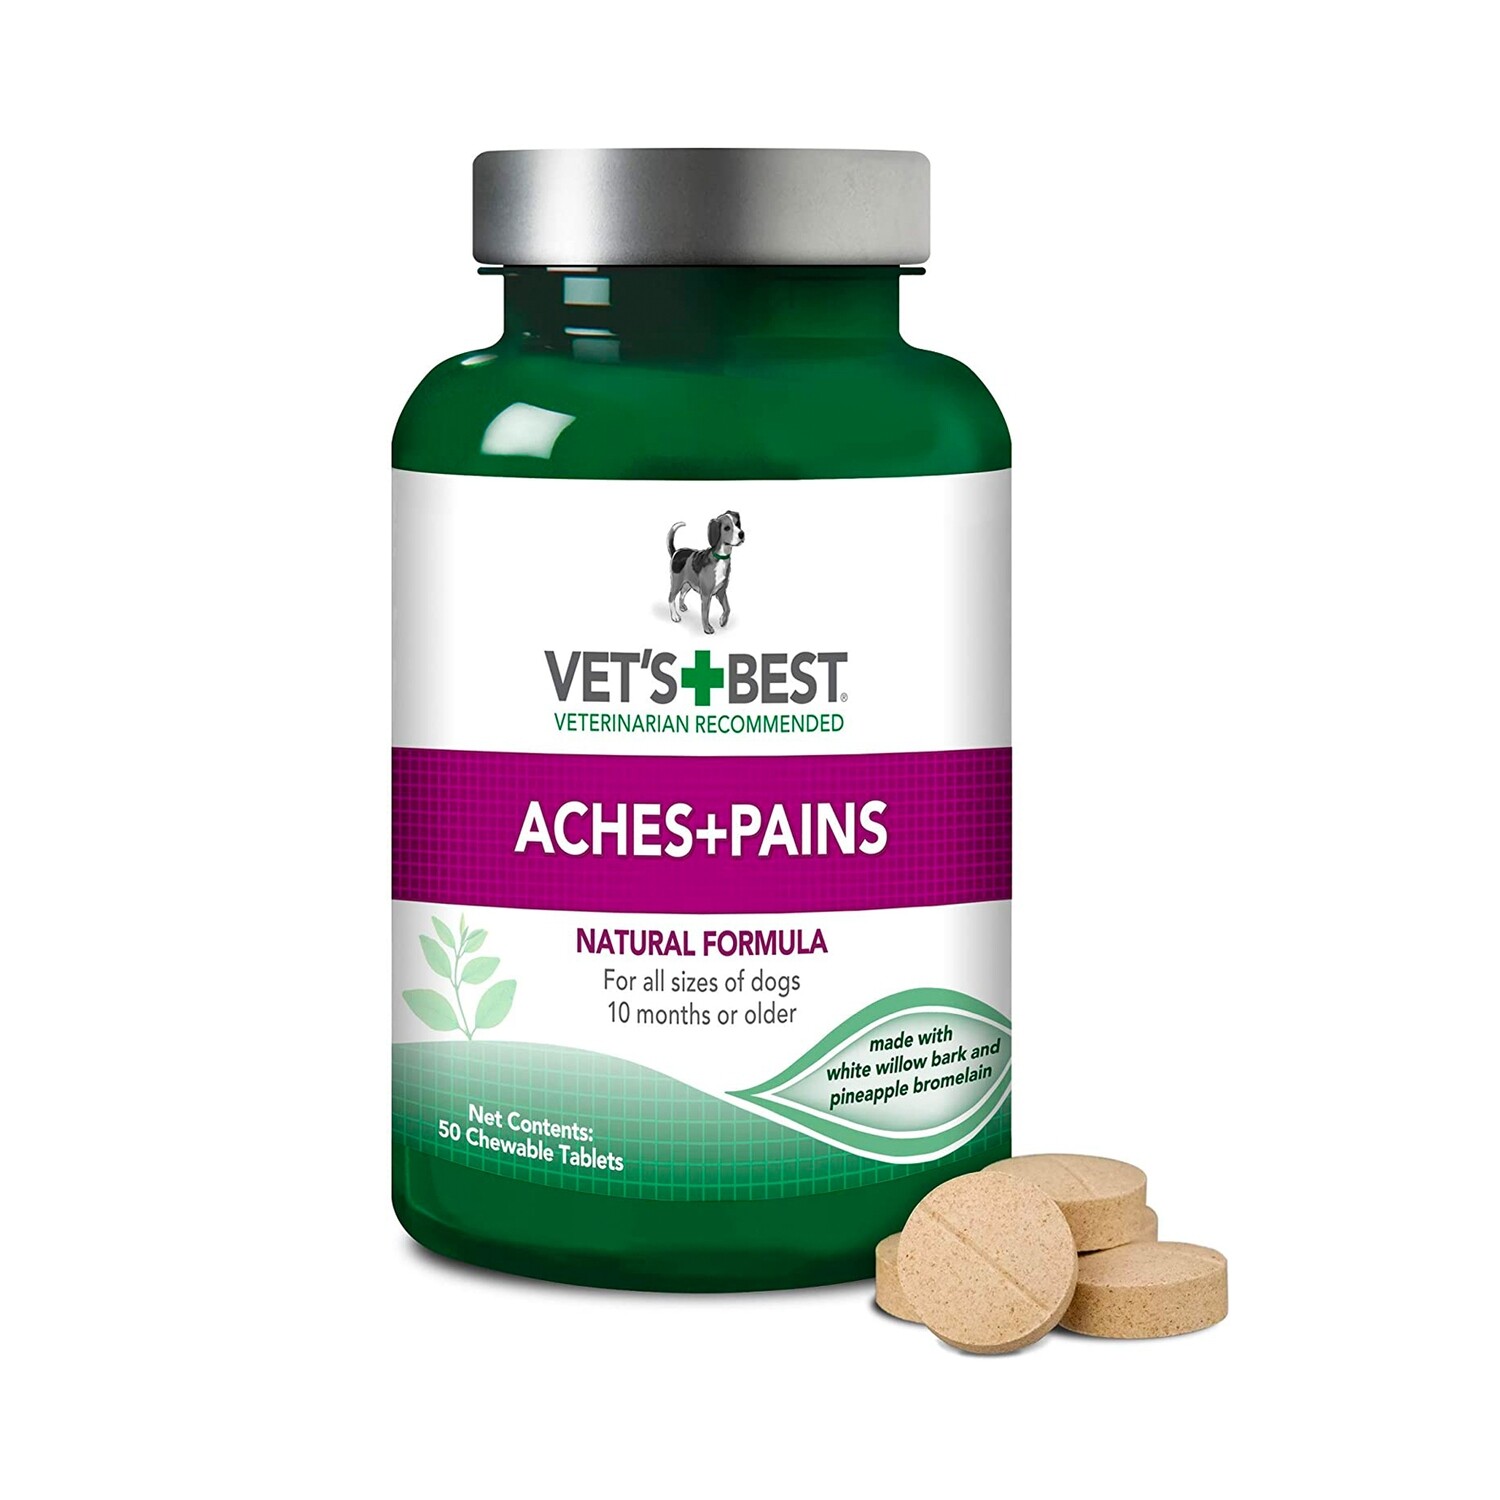 VETS BEST Aches and Pain Supplements Dog - 绿十字减缓皮肤瘙痒和疼痛片 犬用